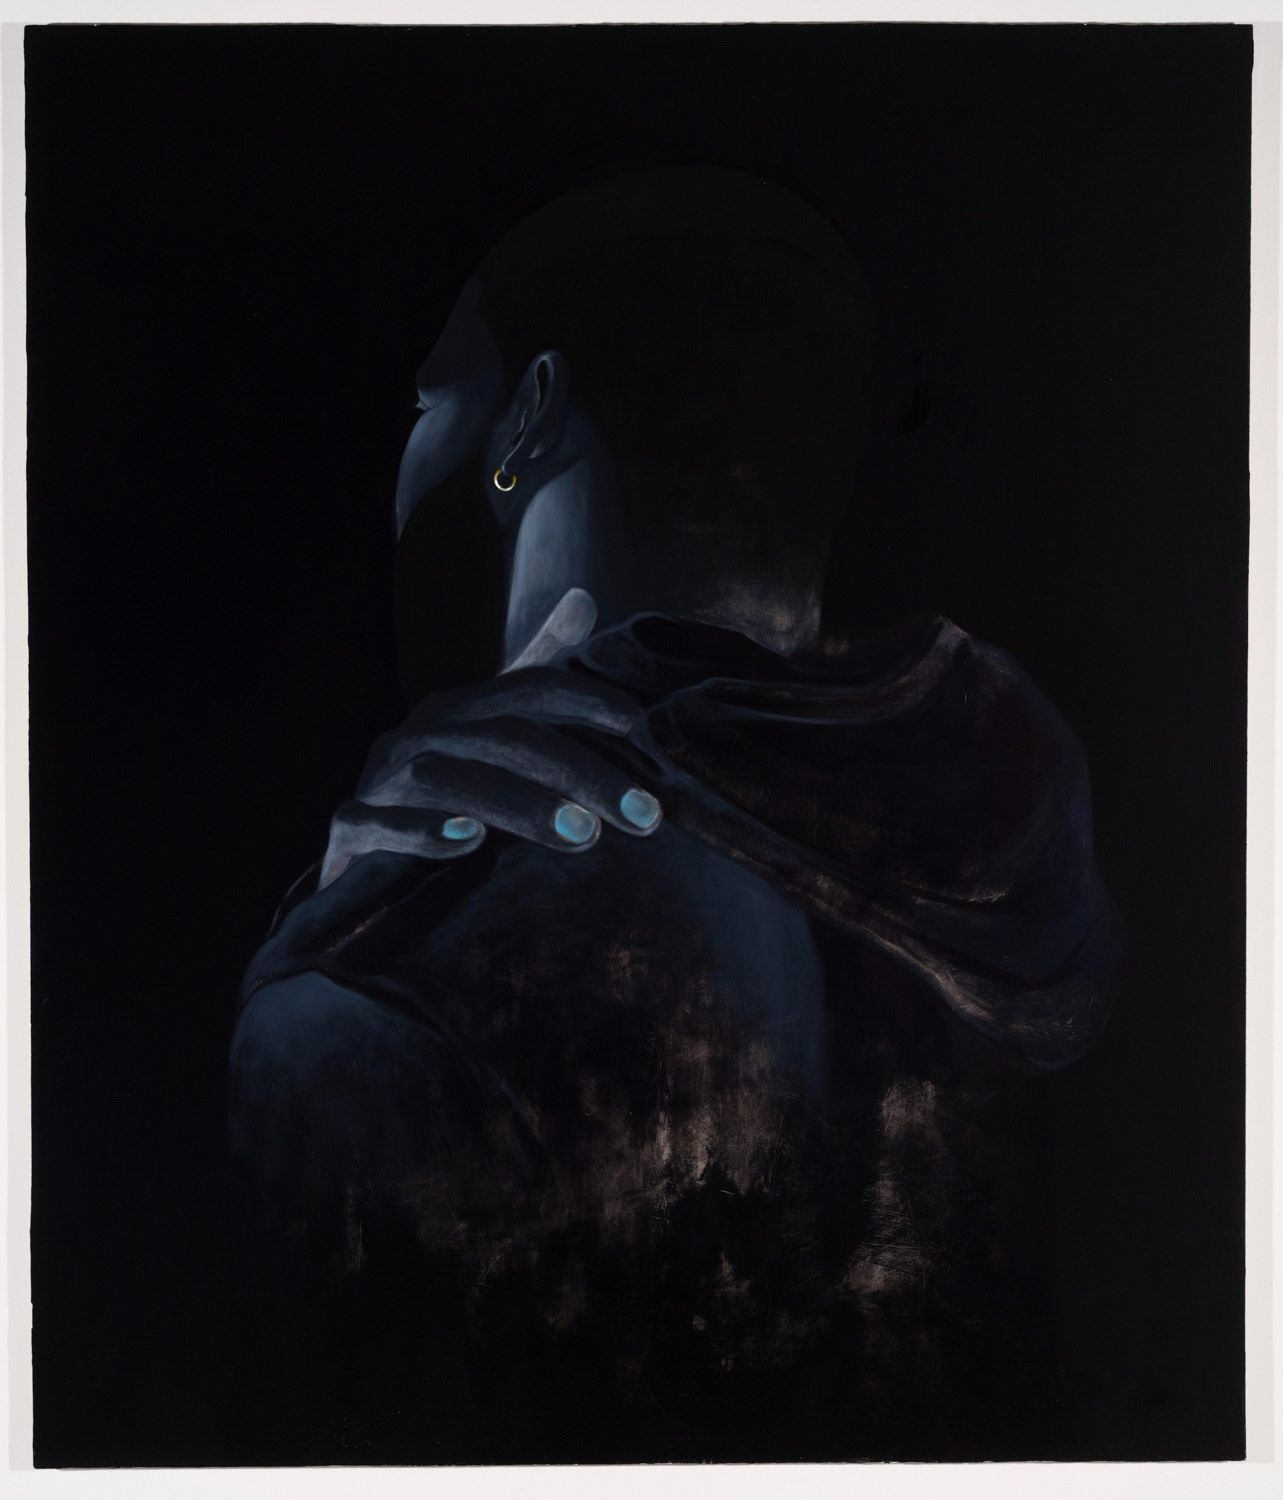 DOMINIC CHAMBERS, Shadow Work (On Letting Go), 2021